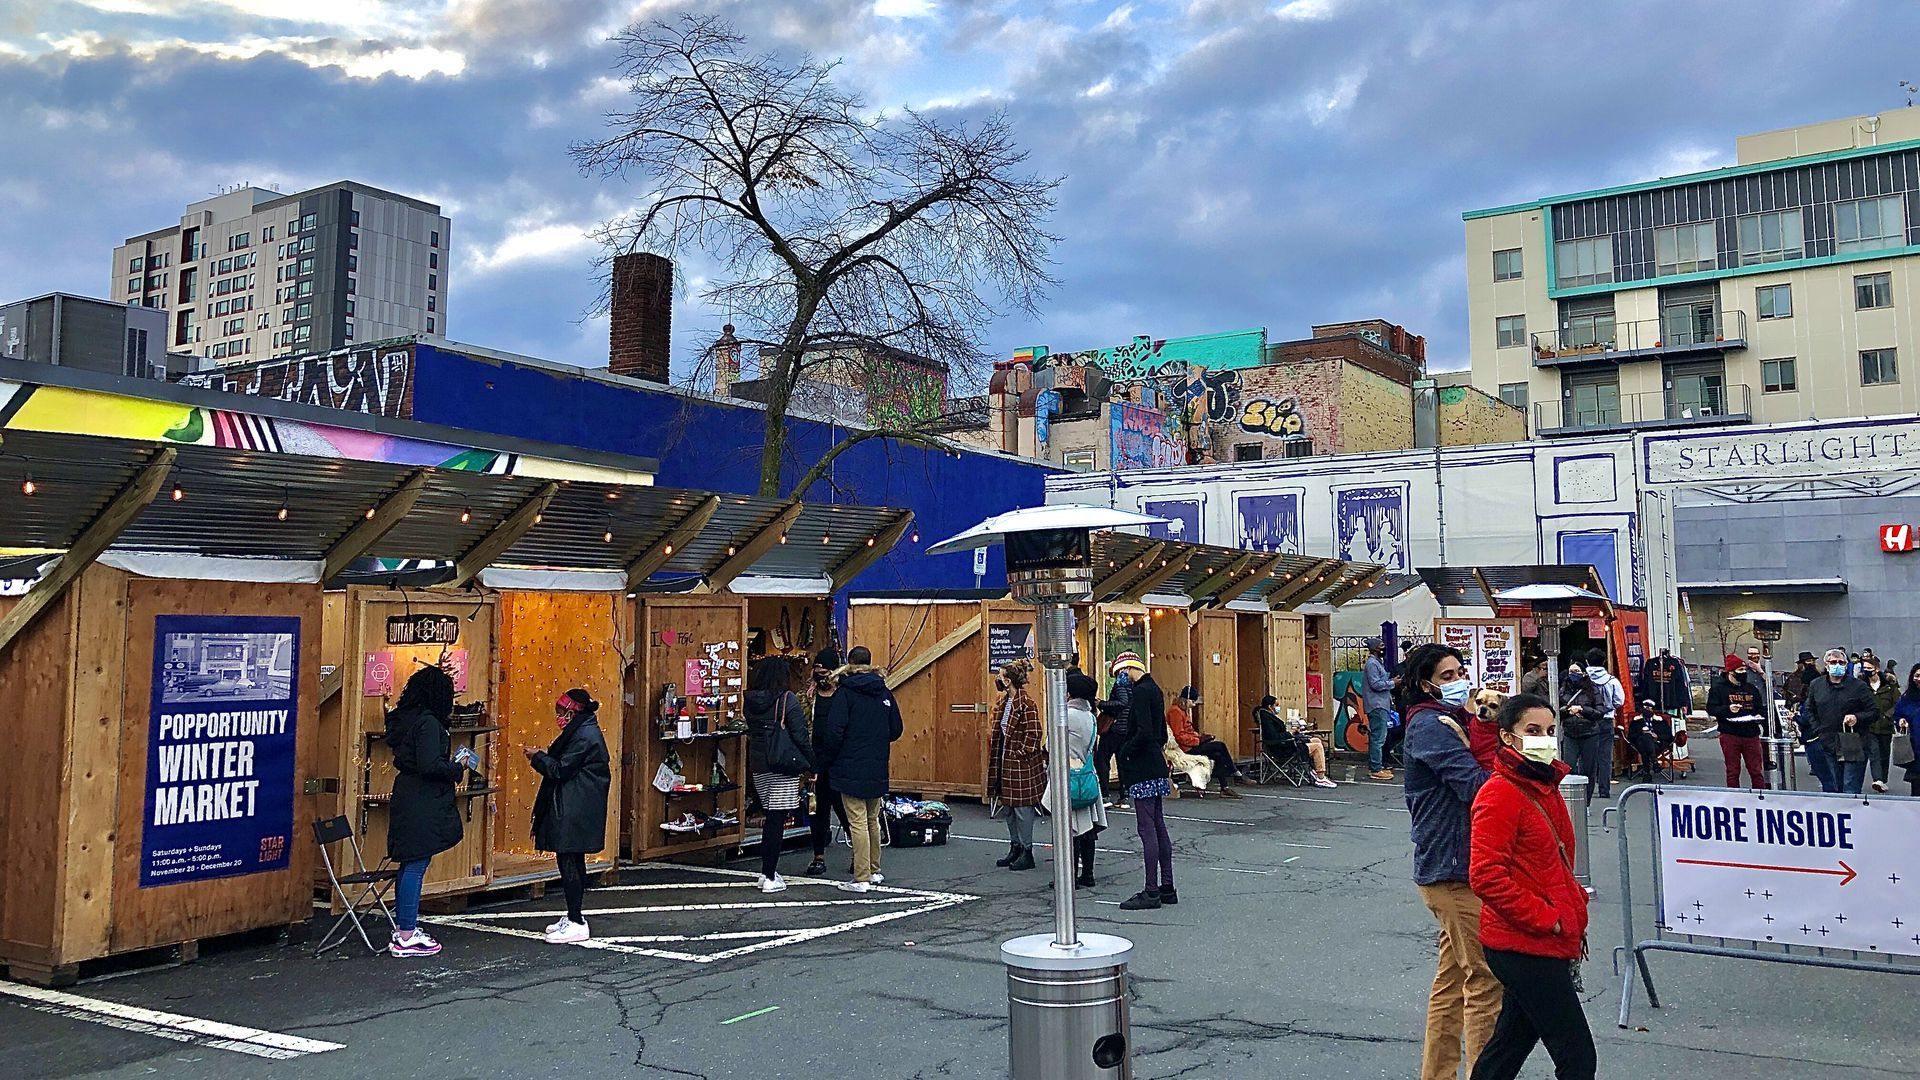 Picture of Popportunity Winter Market in Central Square